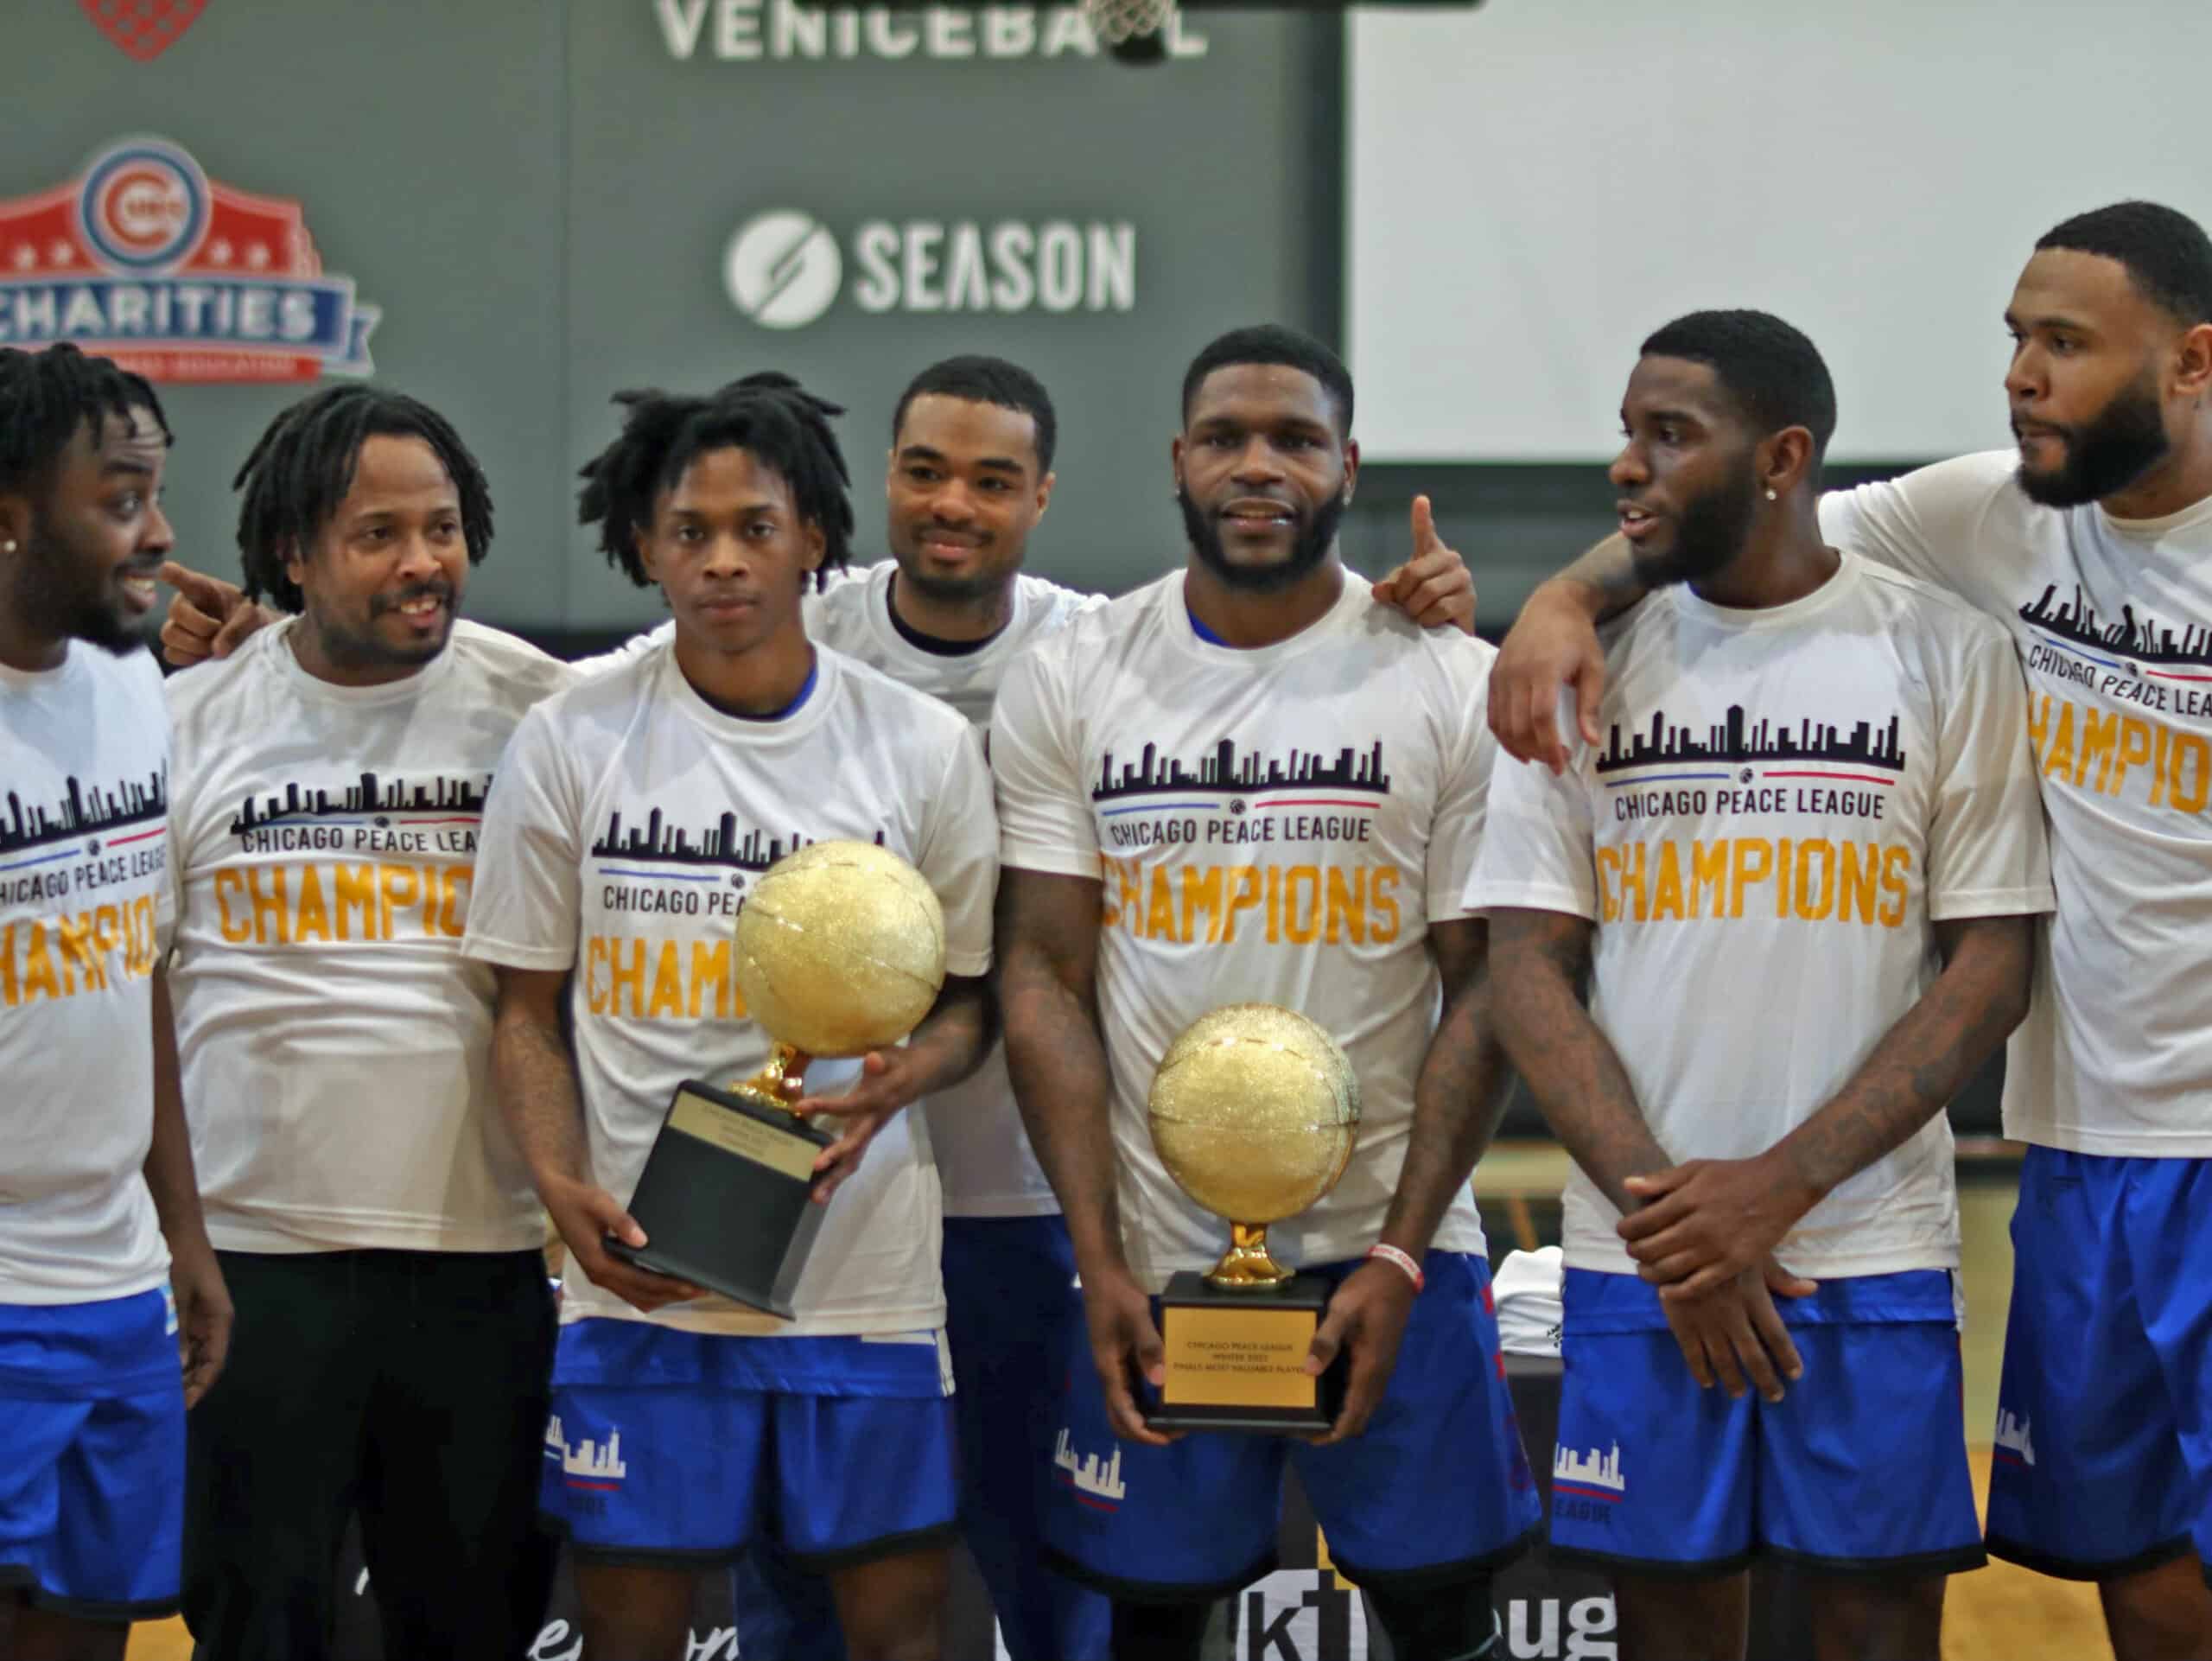 Chicago Peace League champions players holding trophies